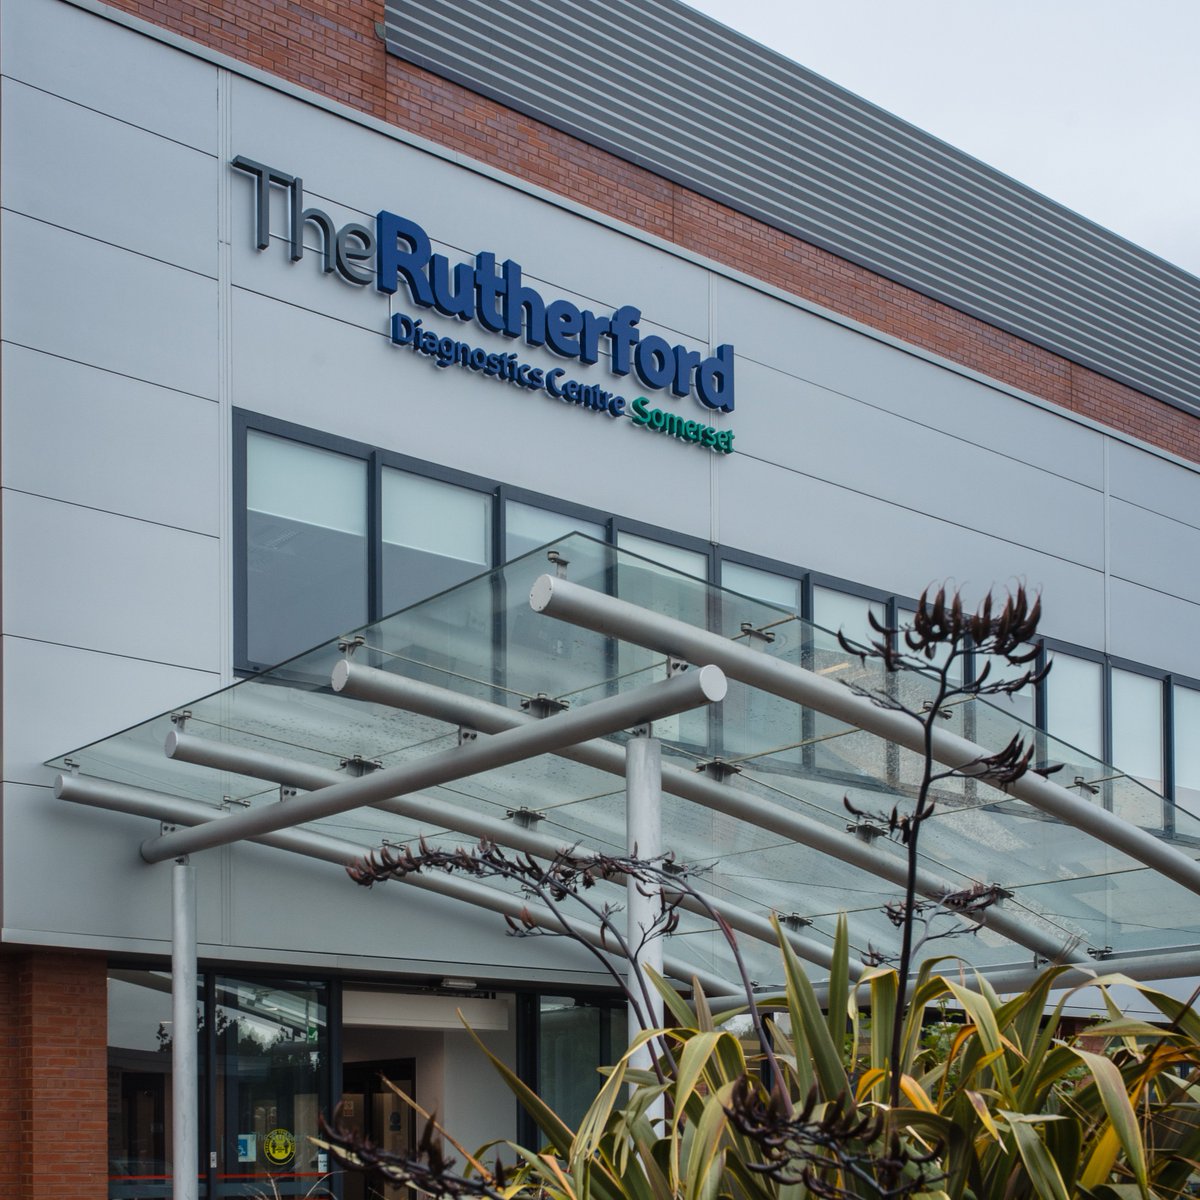 Rutherford Diagnostics and @SomersetFT have entered into an innovative partnership to provide diagnostic services to #NHS patients in Somerset, find out more about the centre and its services here rutherforddiagnostics.co.uk/our-centres/so… #diagnosticimaging #partnership